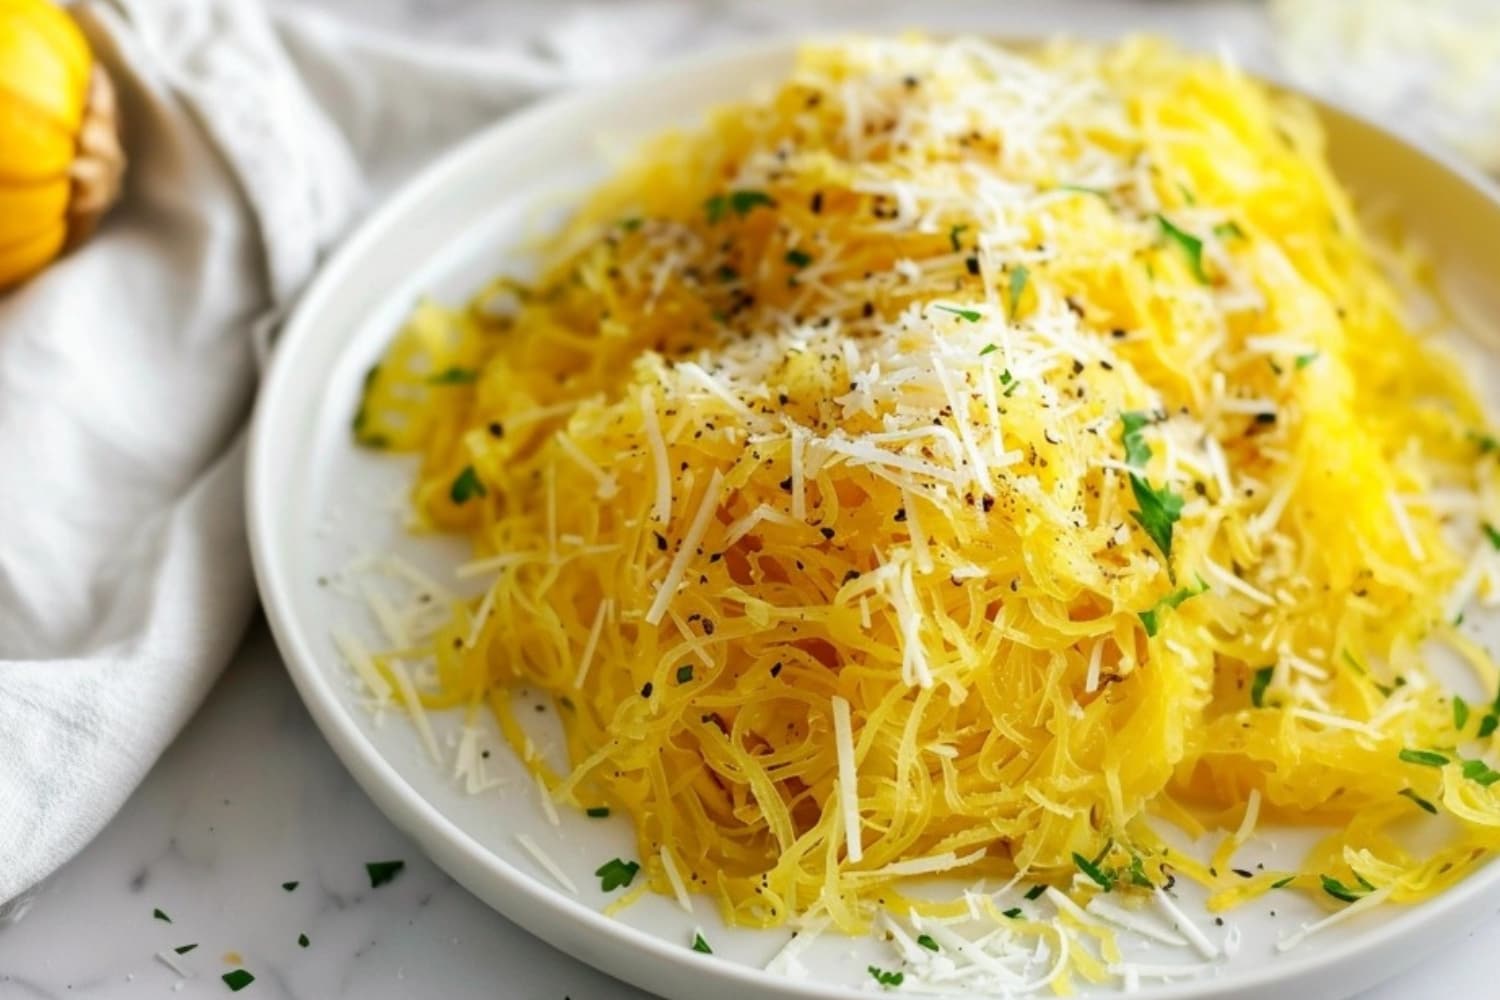 Shredded air fried squash served on a white plate garnished with parmesan cheese.